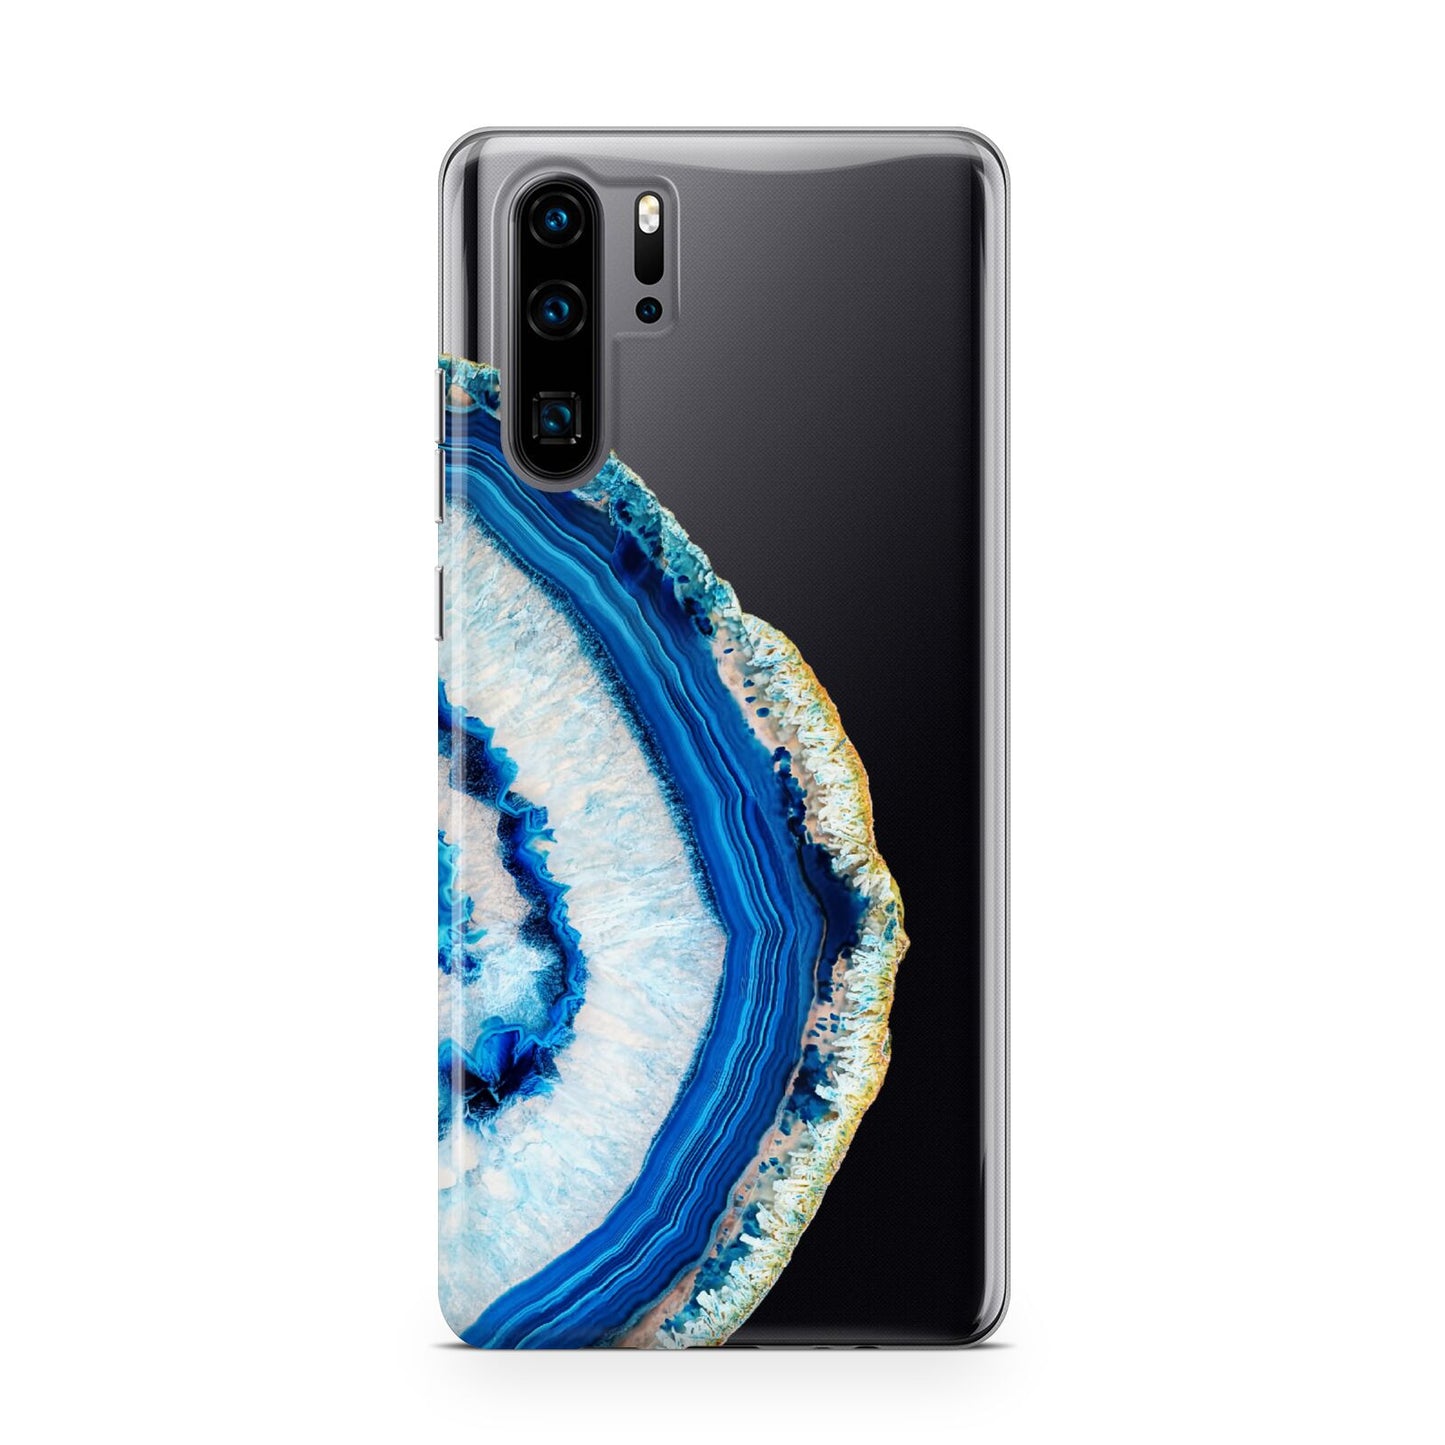 Agate Dark Blue and Turquoise Huawei P30 Pro Phone Case